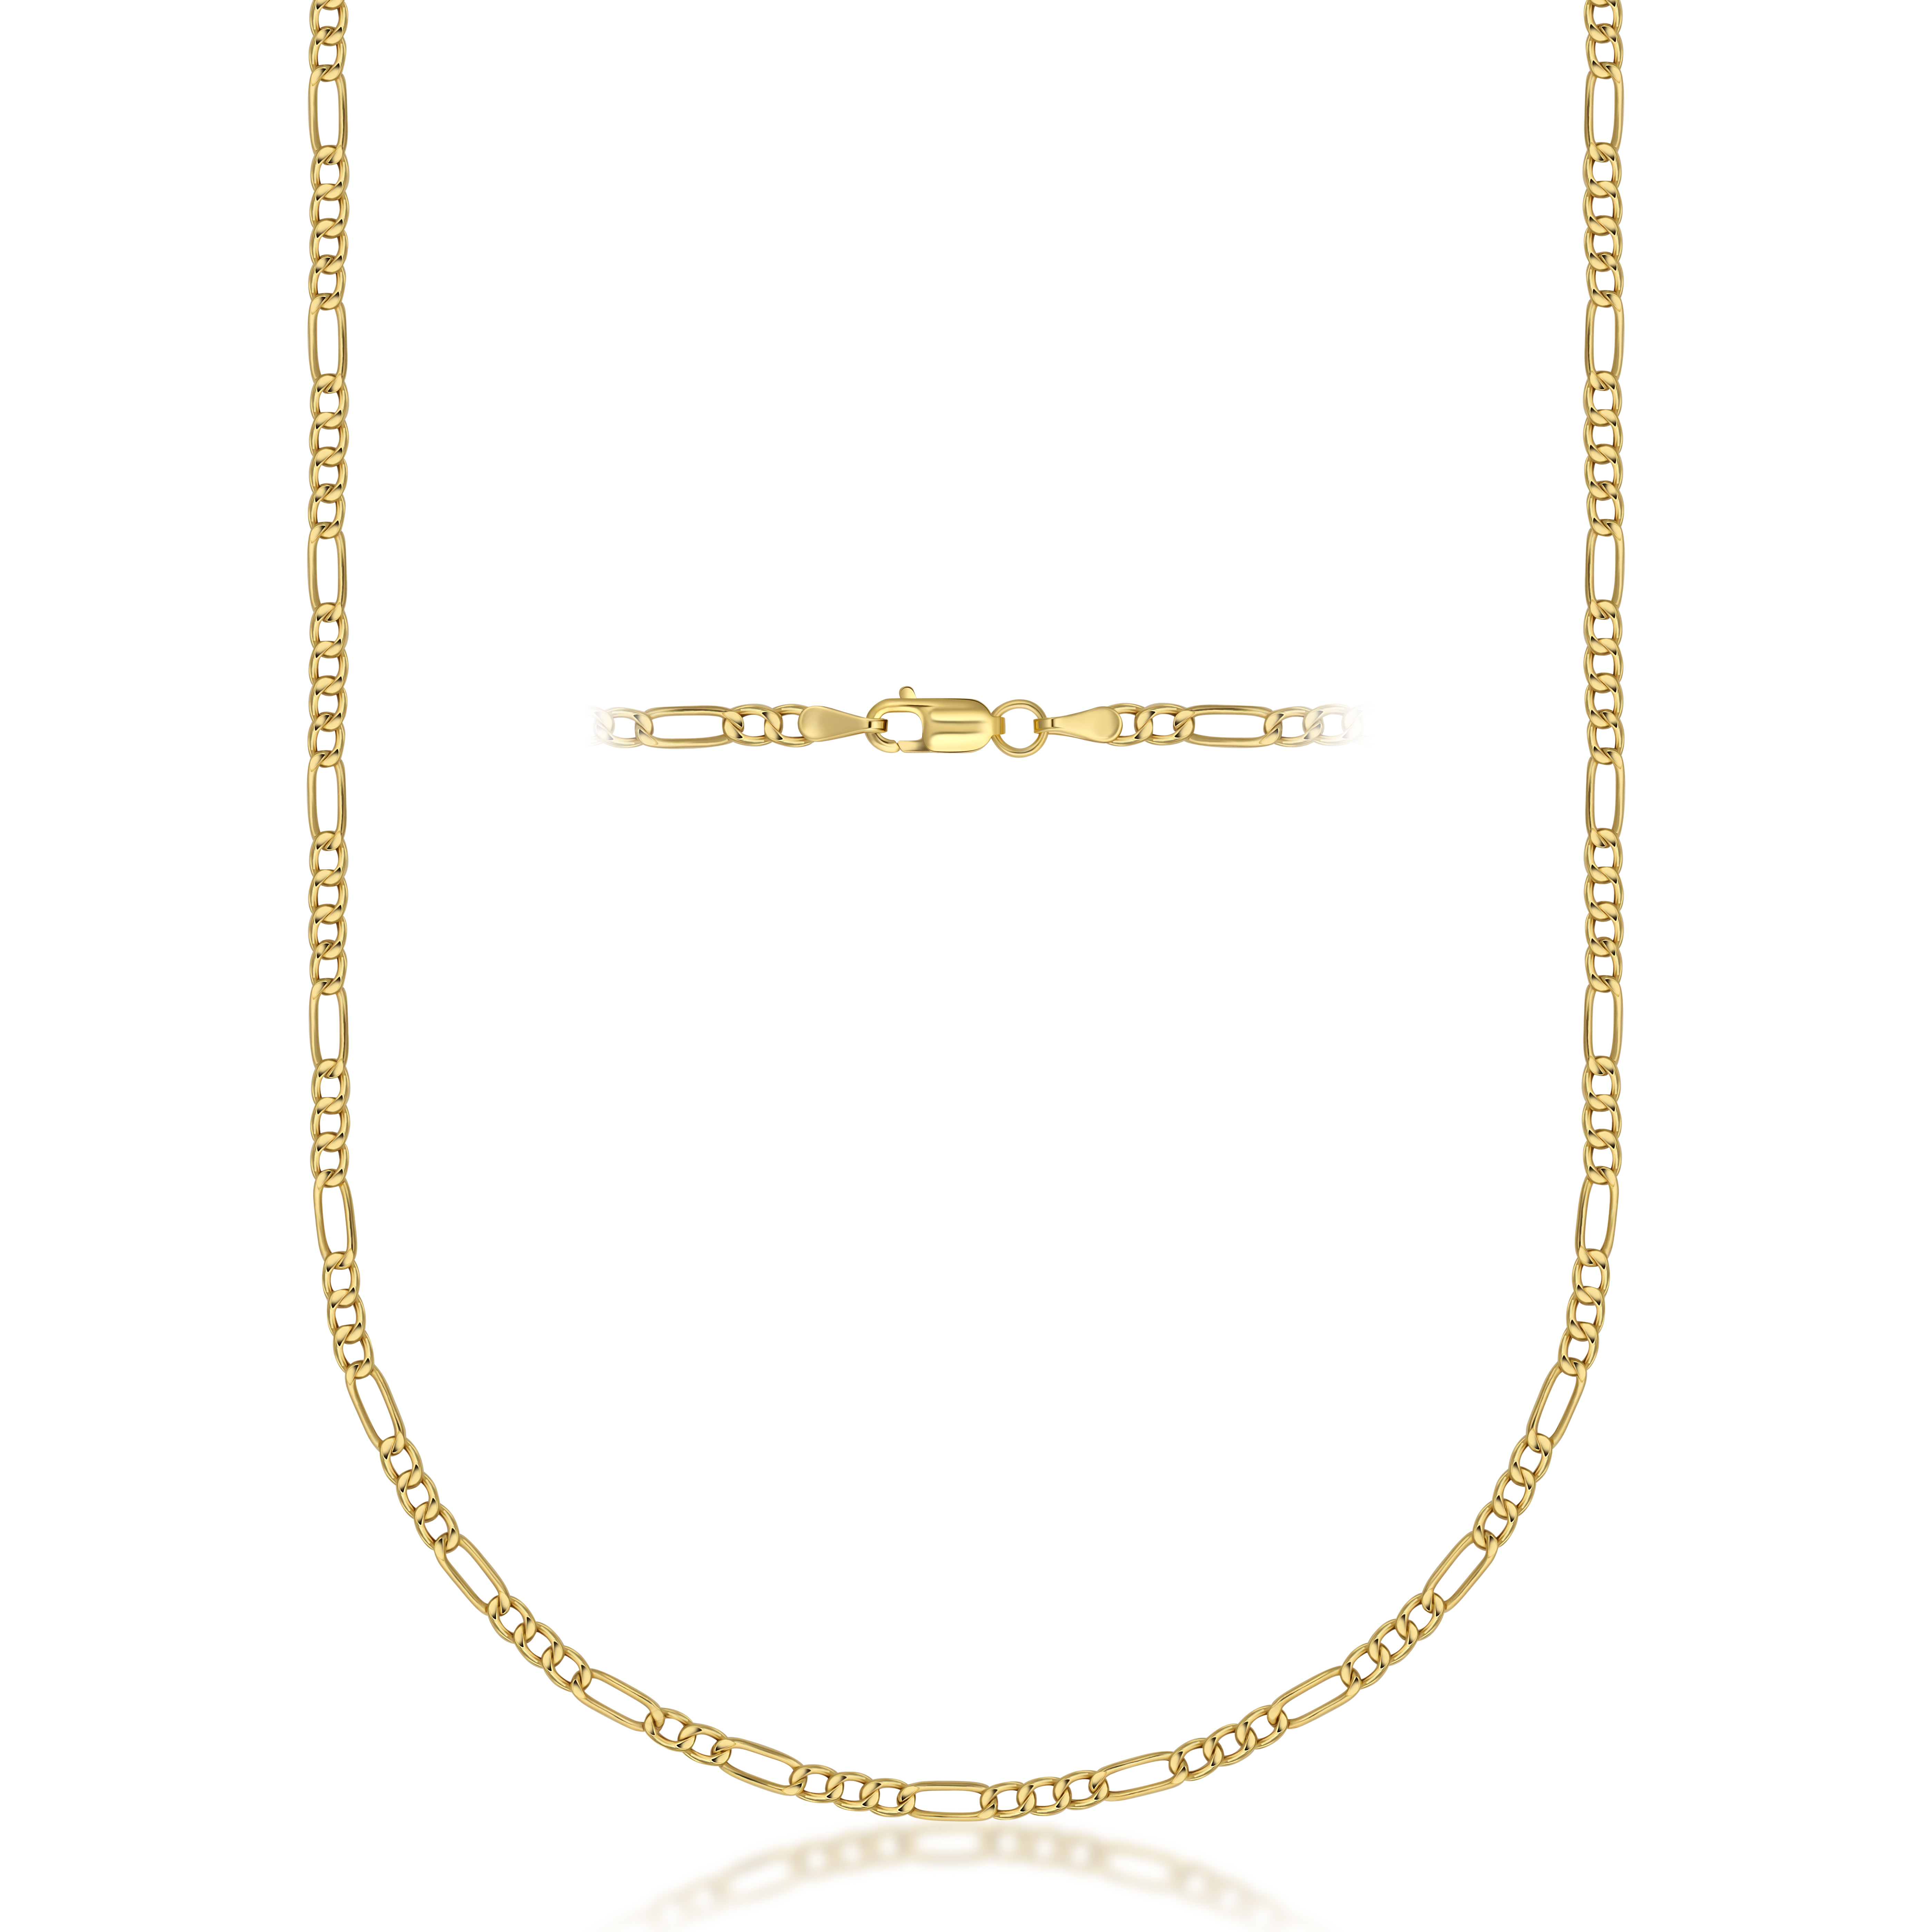 Pori Jewelers 14K Solid Gold 2.5MM Figaro Chain Necklace - image 1 of 6